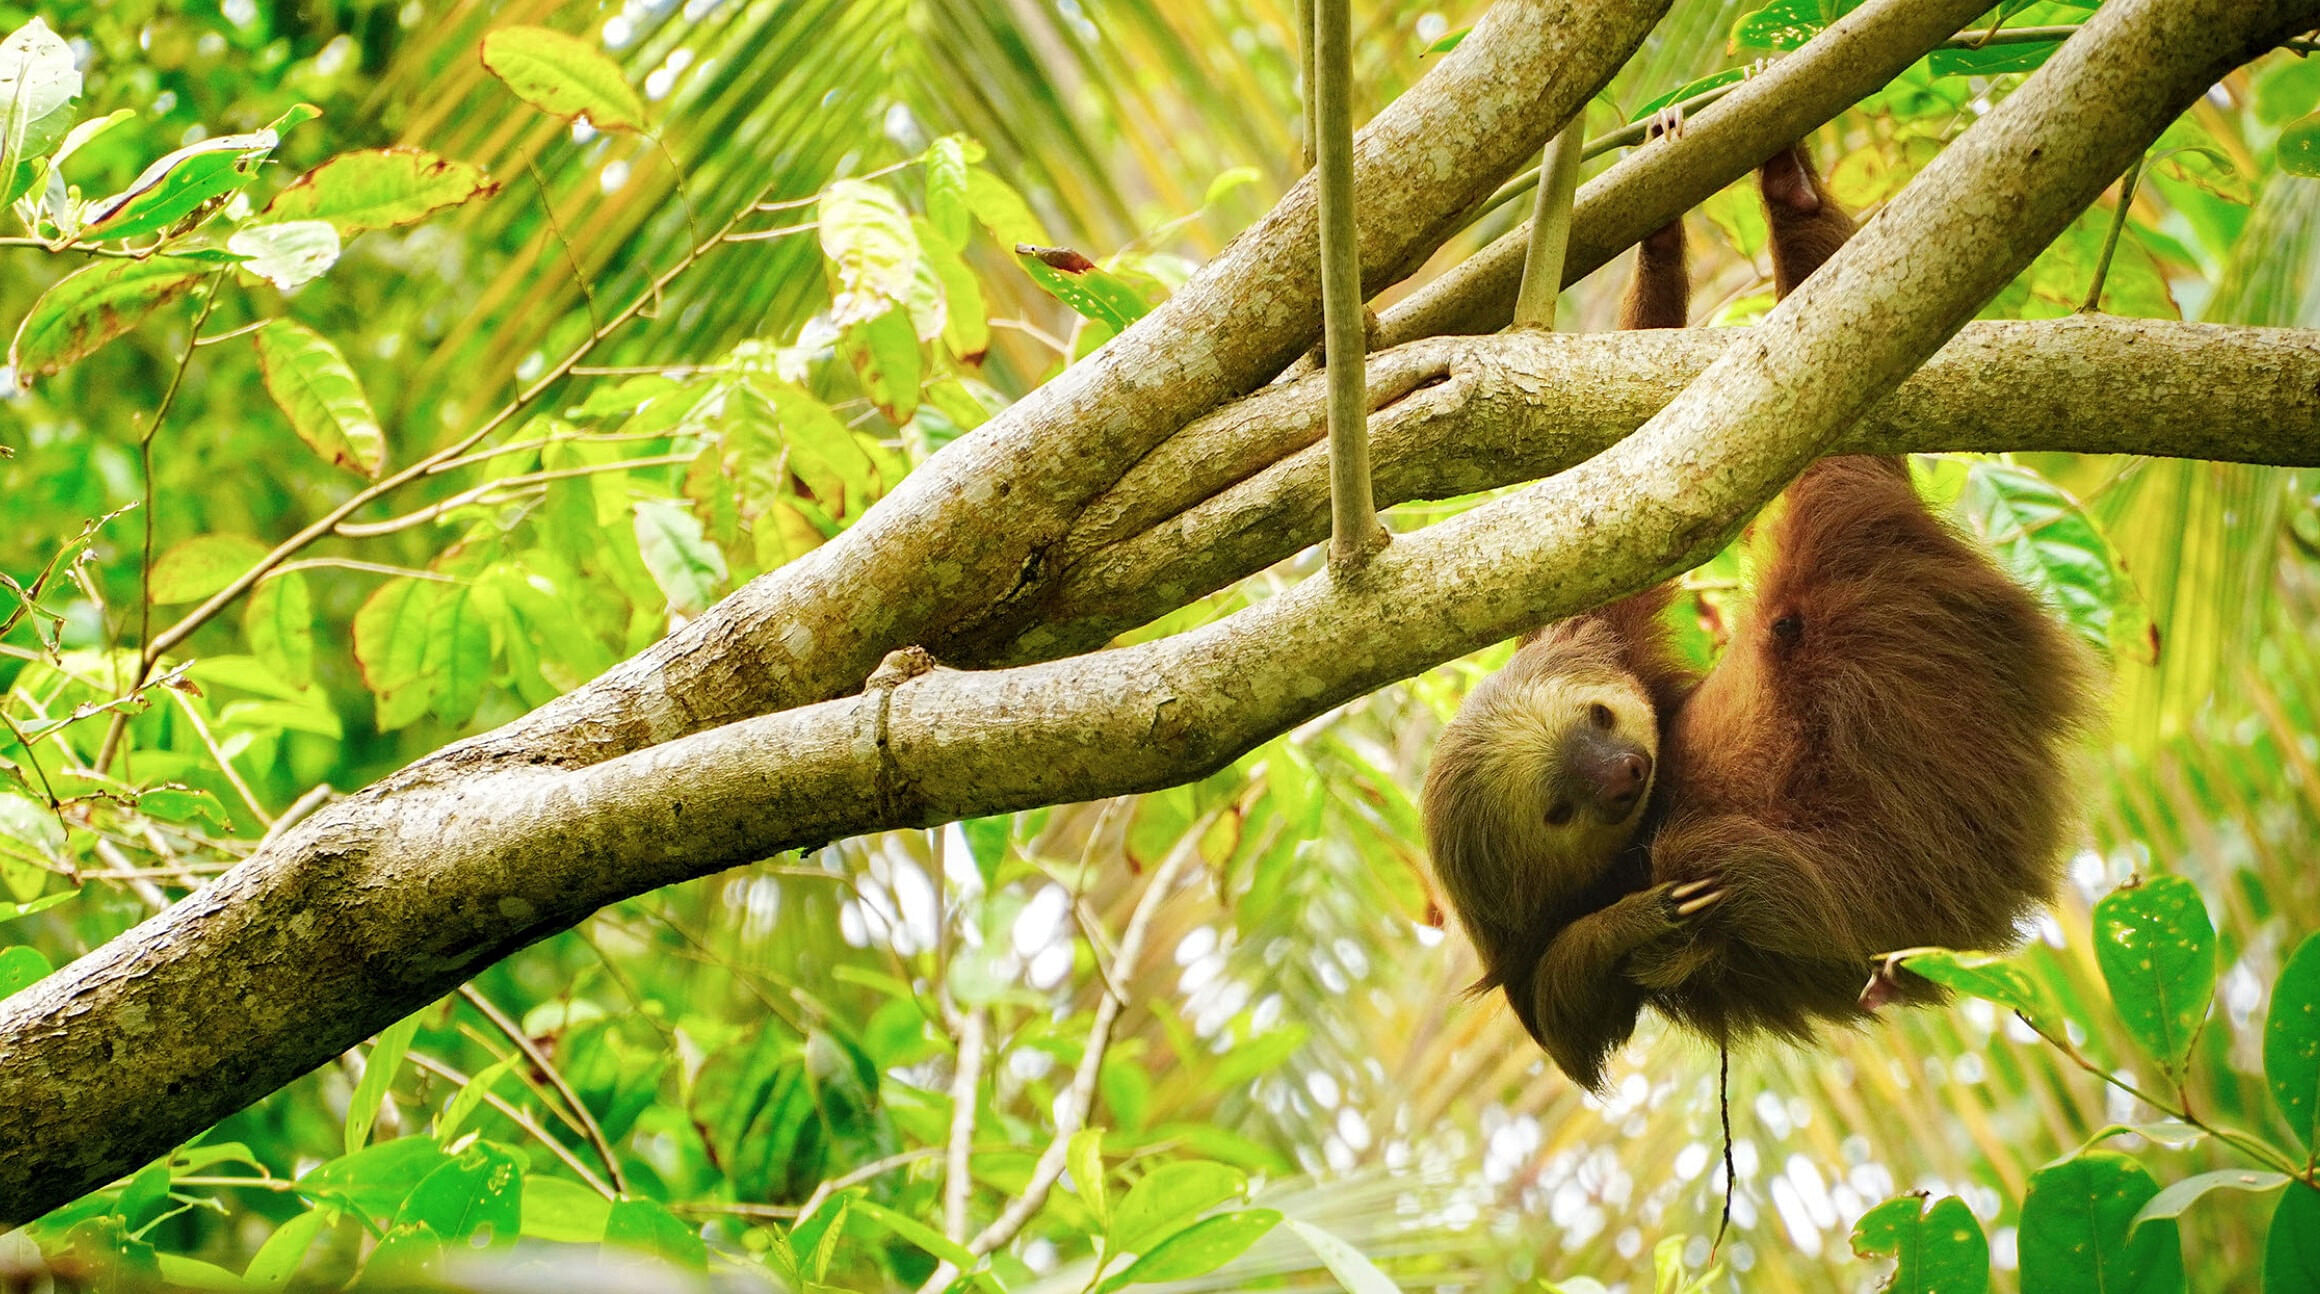 Sloth hanging from a tree in Costa Rica